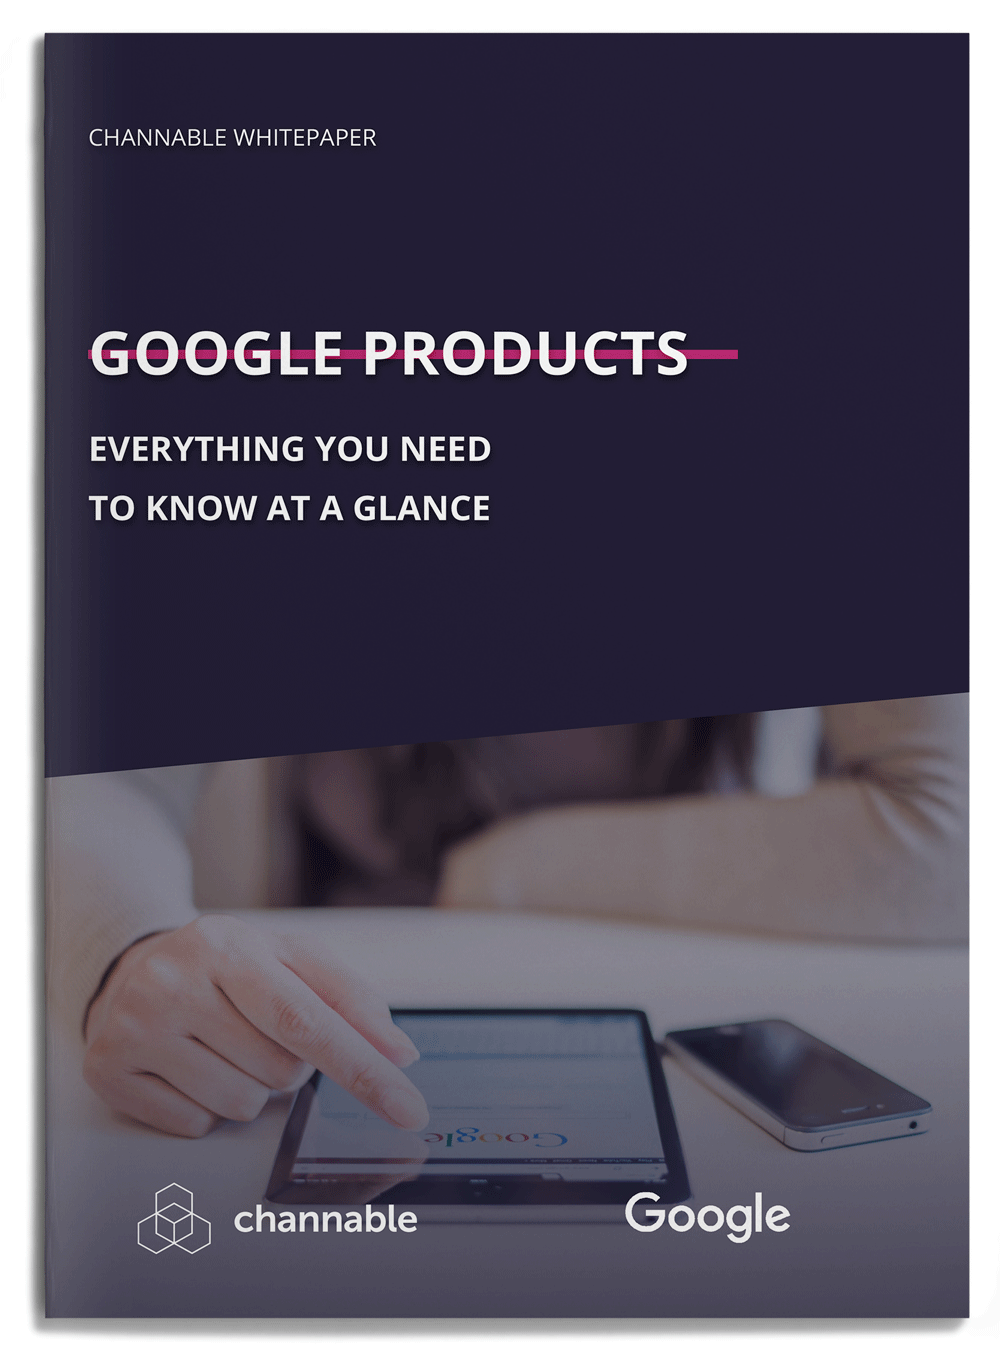 Explained: Google’s products for advertisers